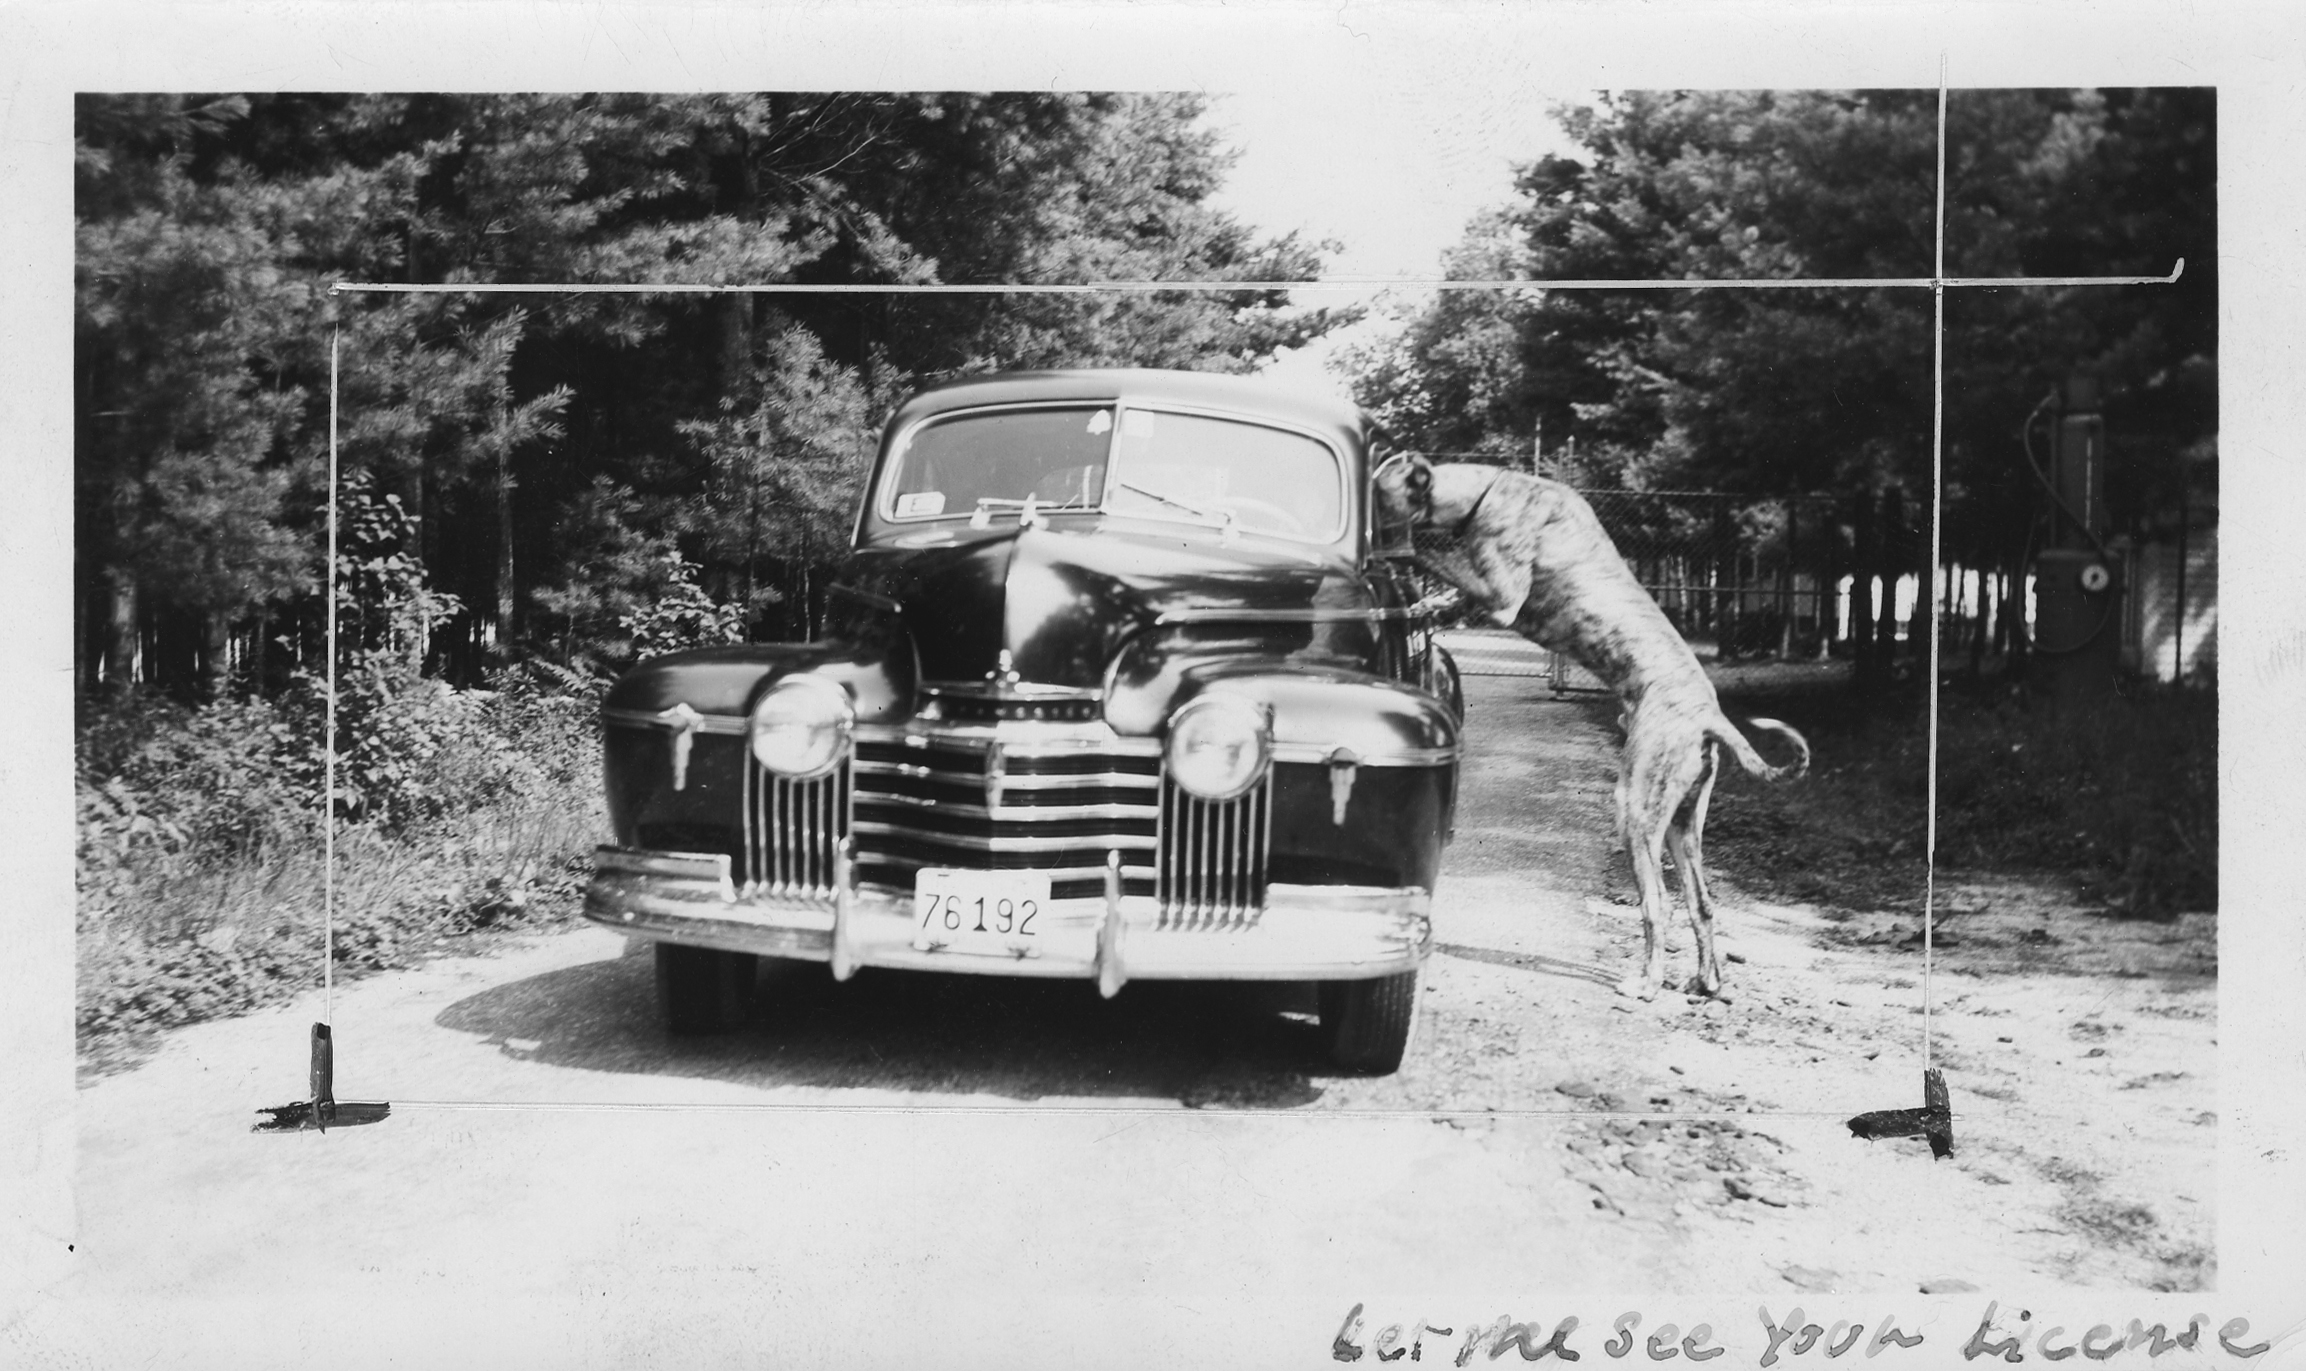 Black and white photograph of a large dog with its forelegs and head in the driver's side window of a car. Text reads "Let me see your liicense".